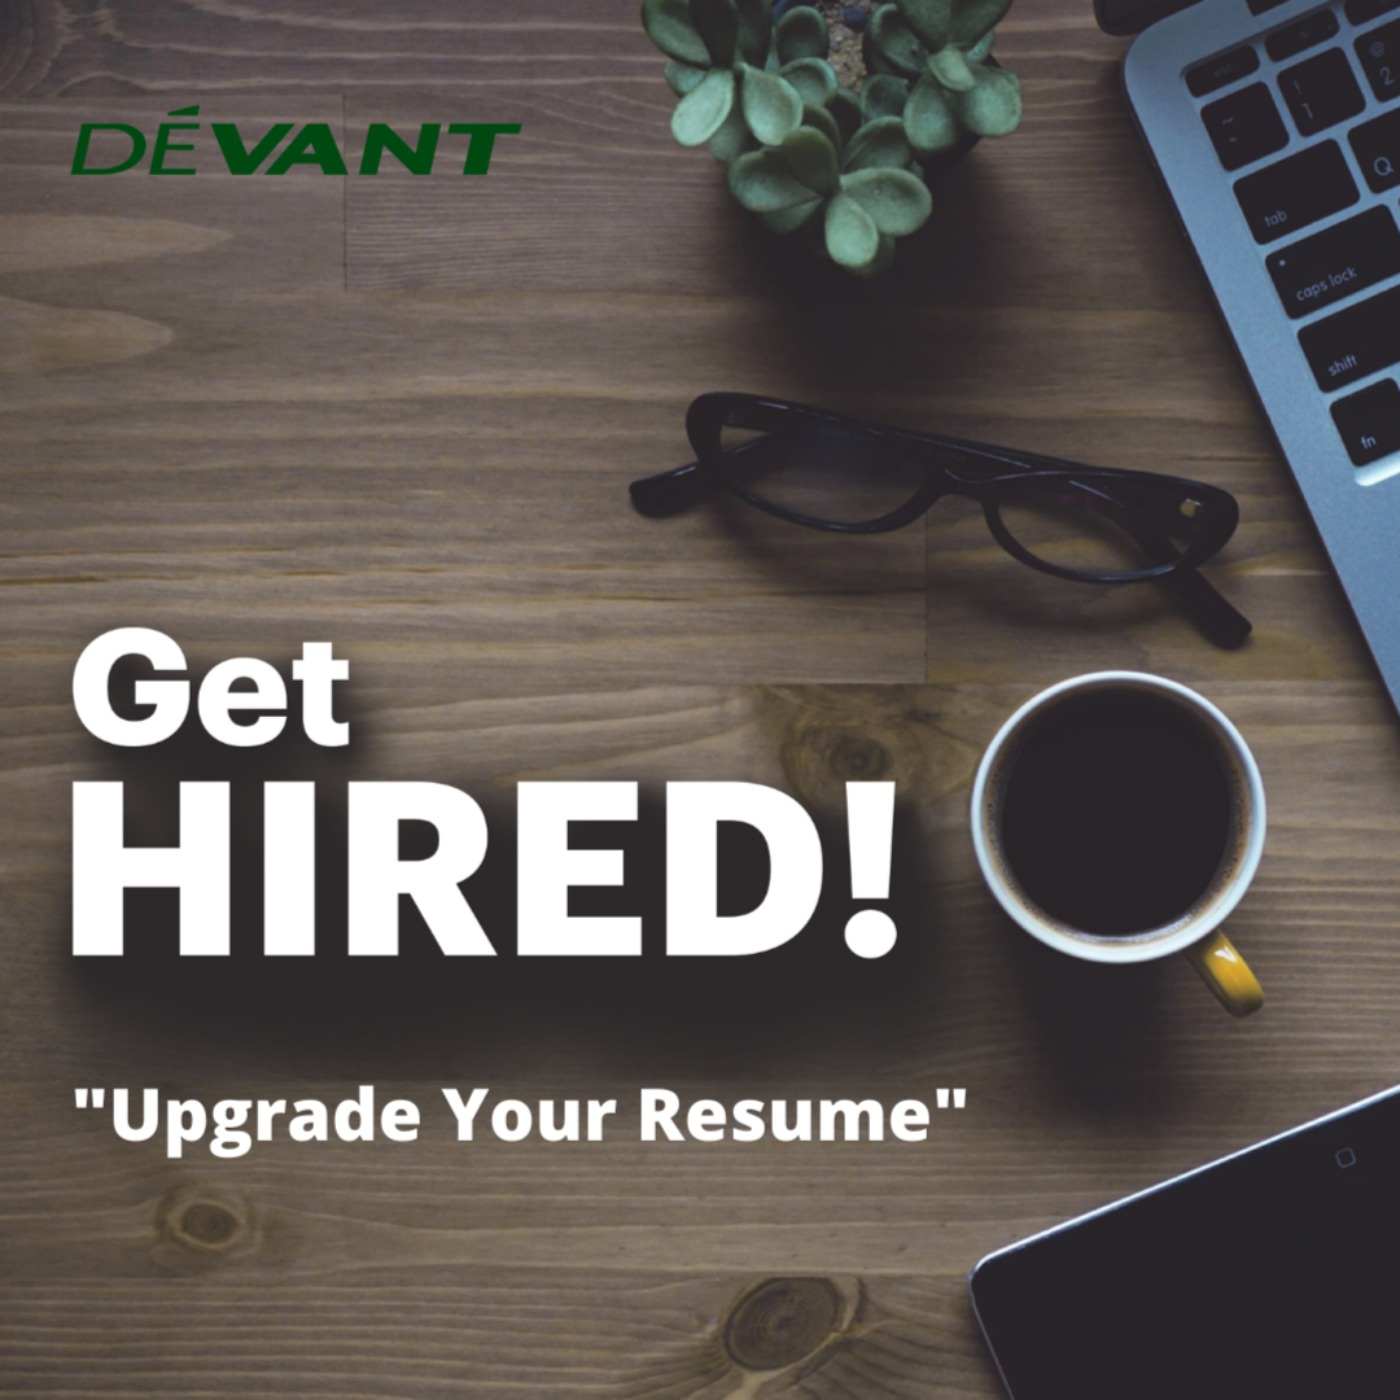 Get Hired: "Upgrade Your Resume"